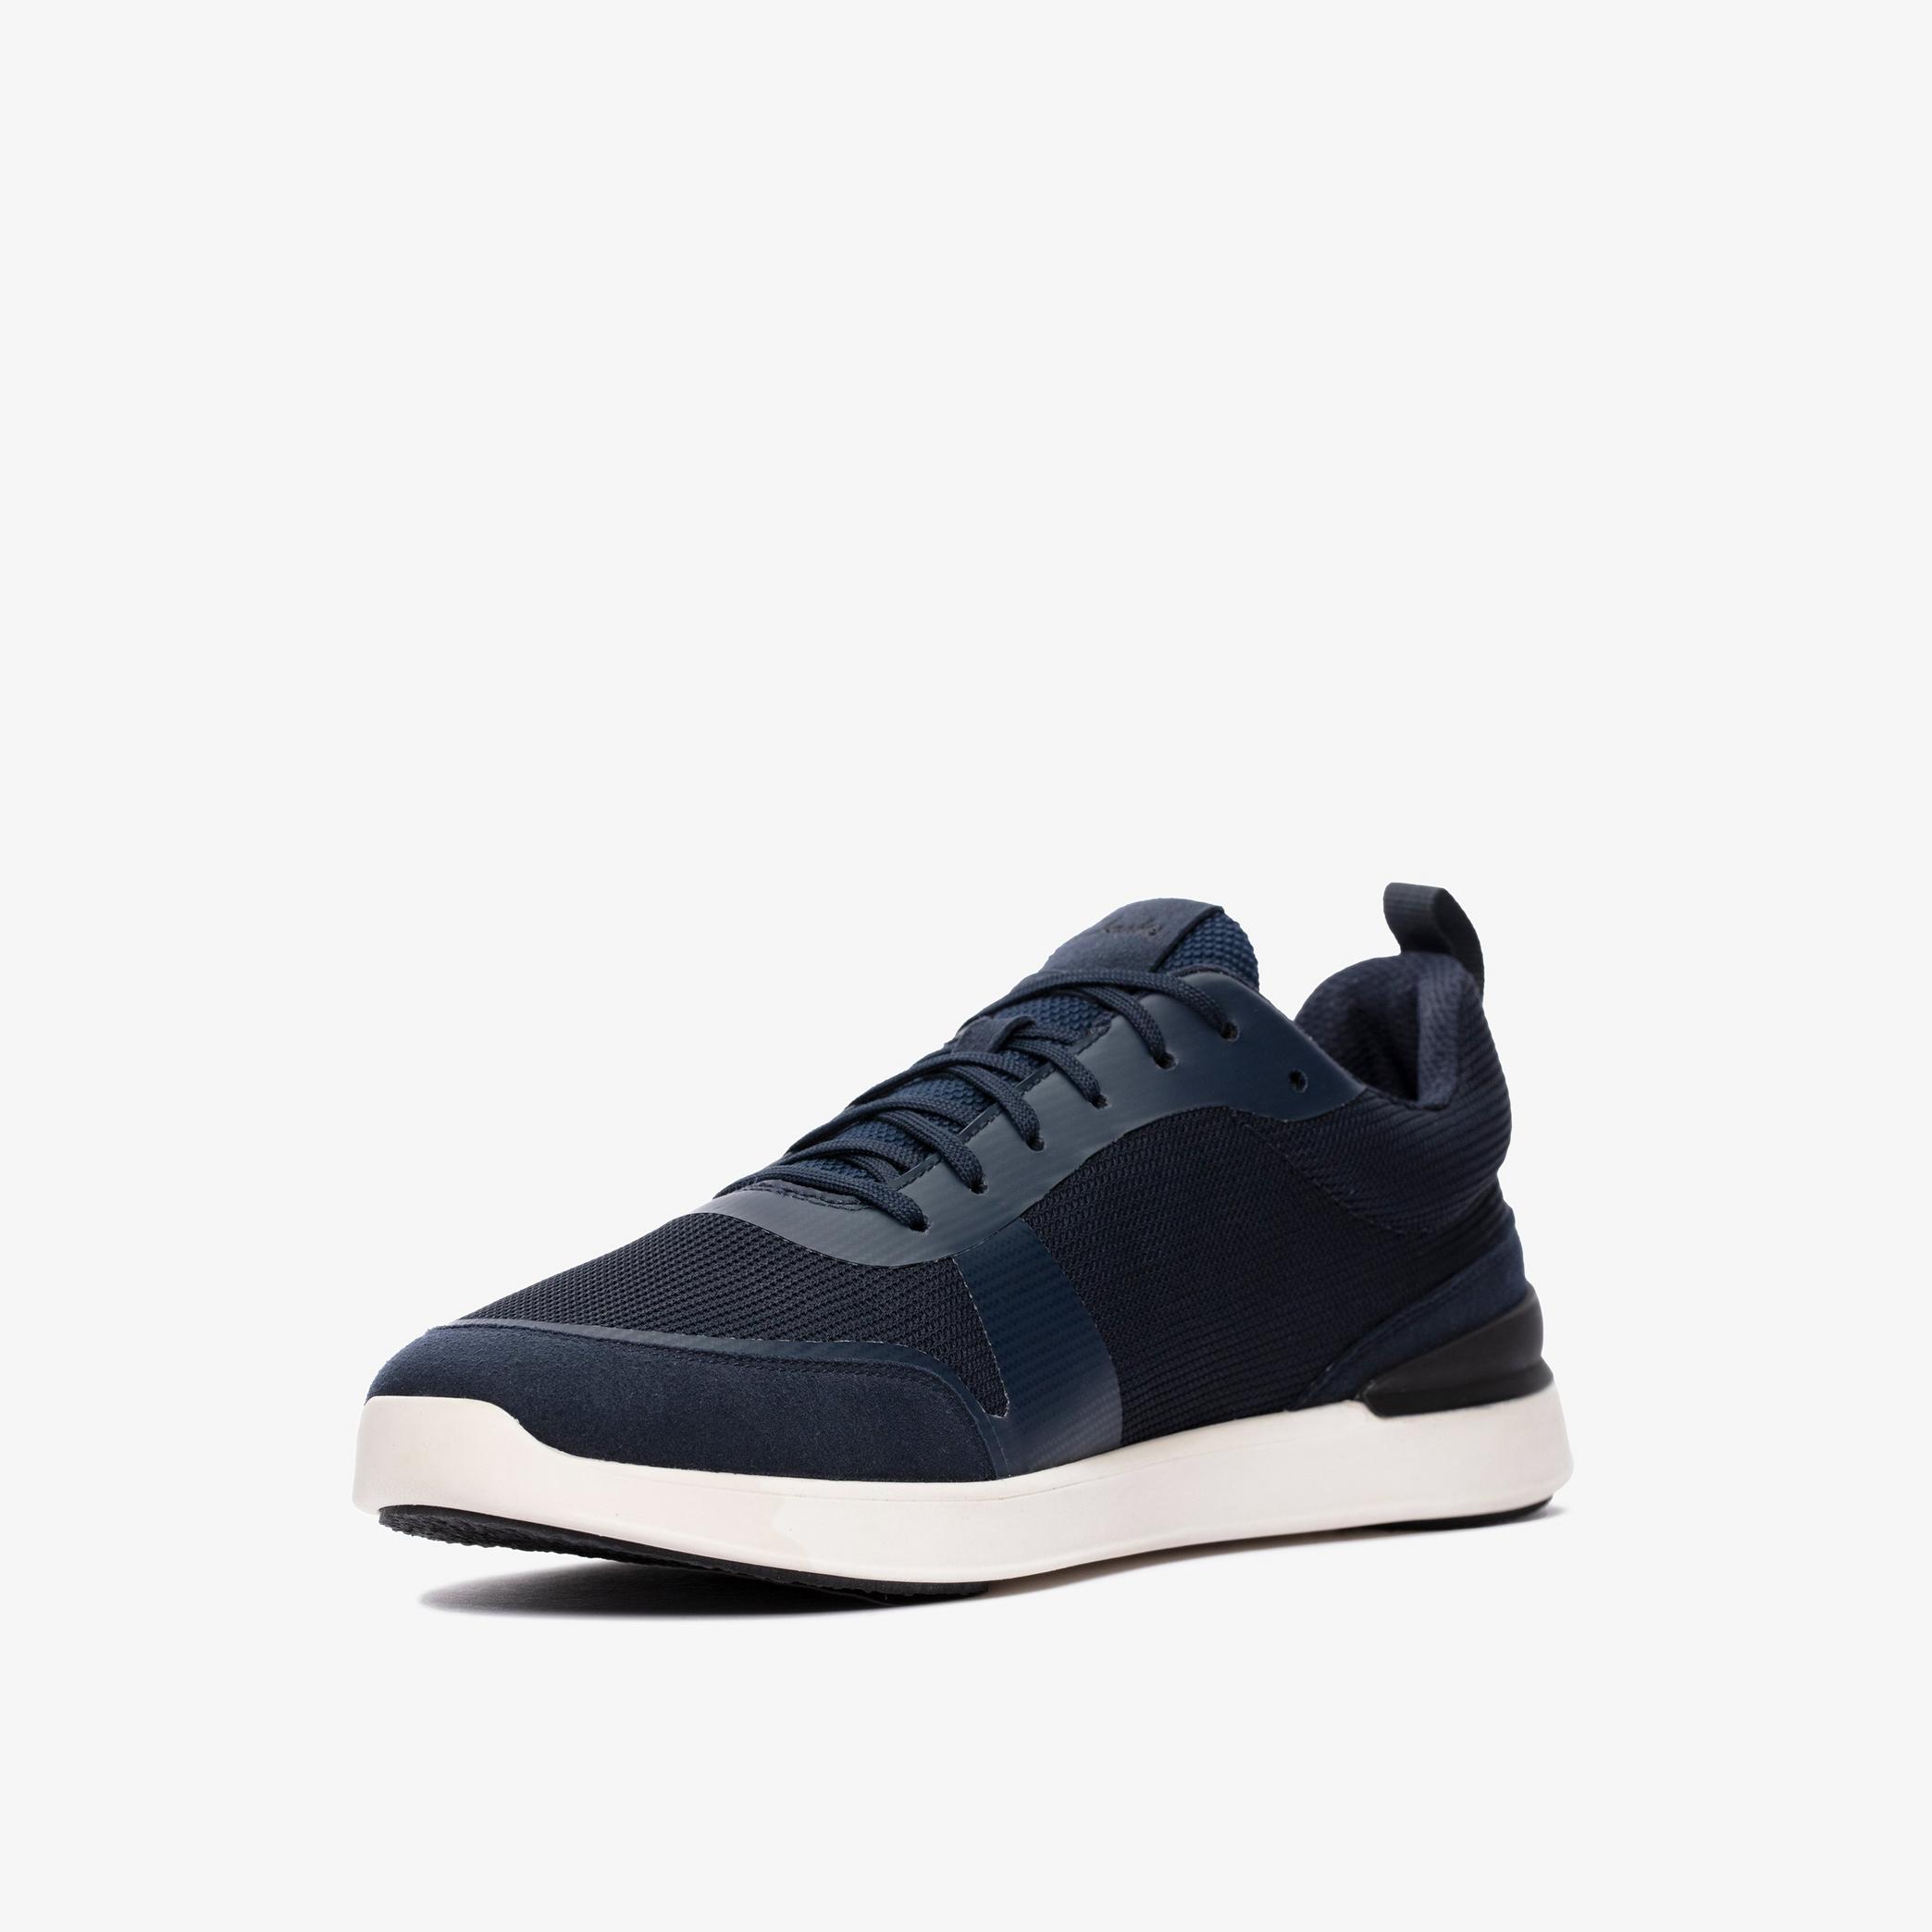 LT Lace Navy Knit Trainers, view 4 of 6